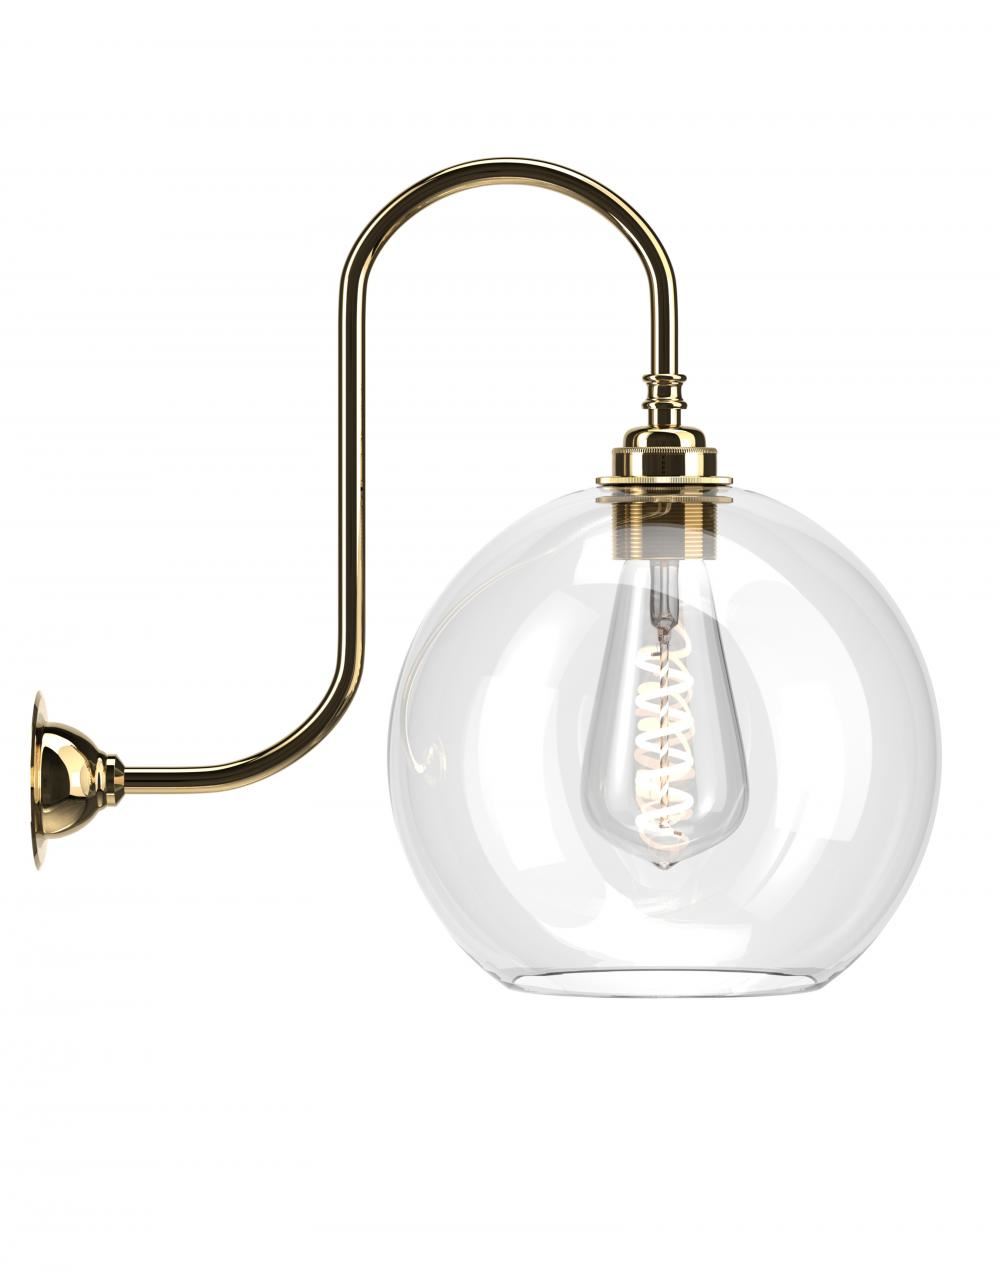 Hereford Swan Neck Bathroom Wall Light Large Clear Polished Brass